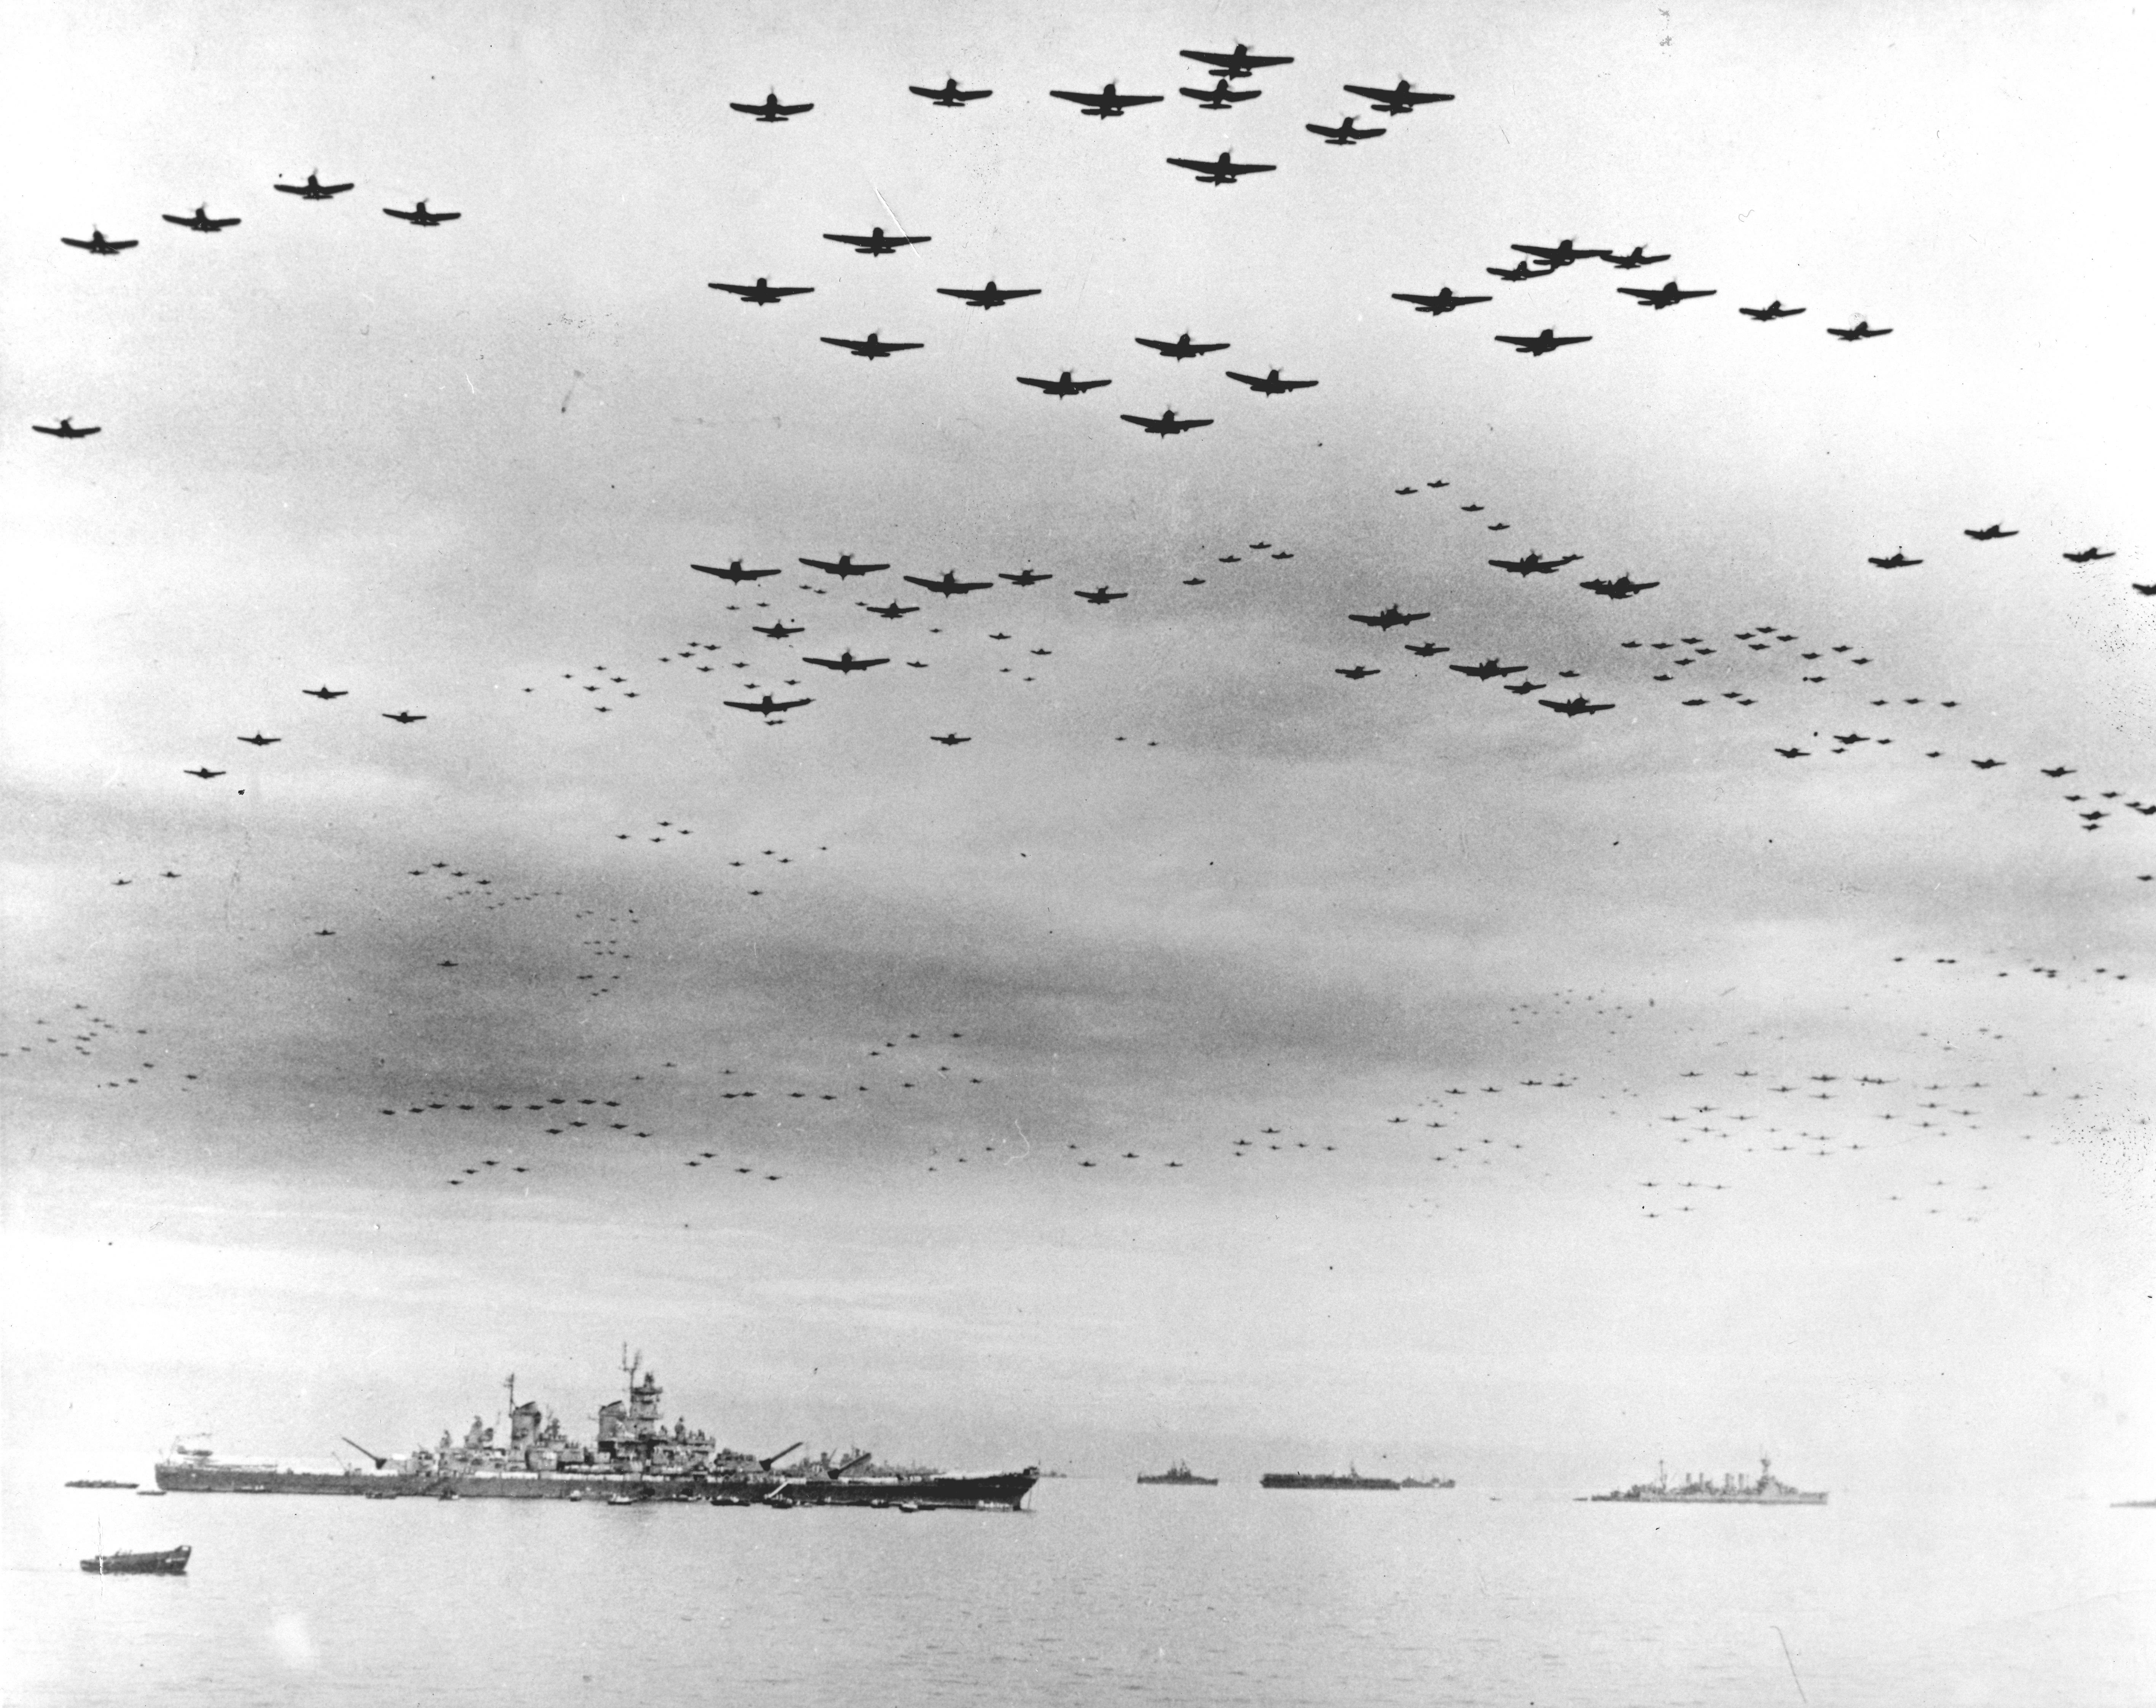 American aircraft fly over USS Missouri after the surrender, photo 2 of 3